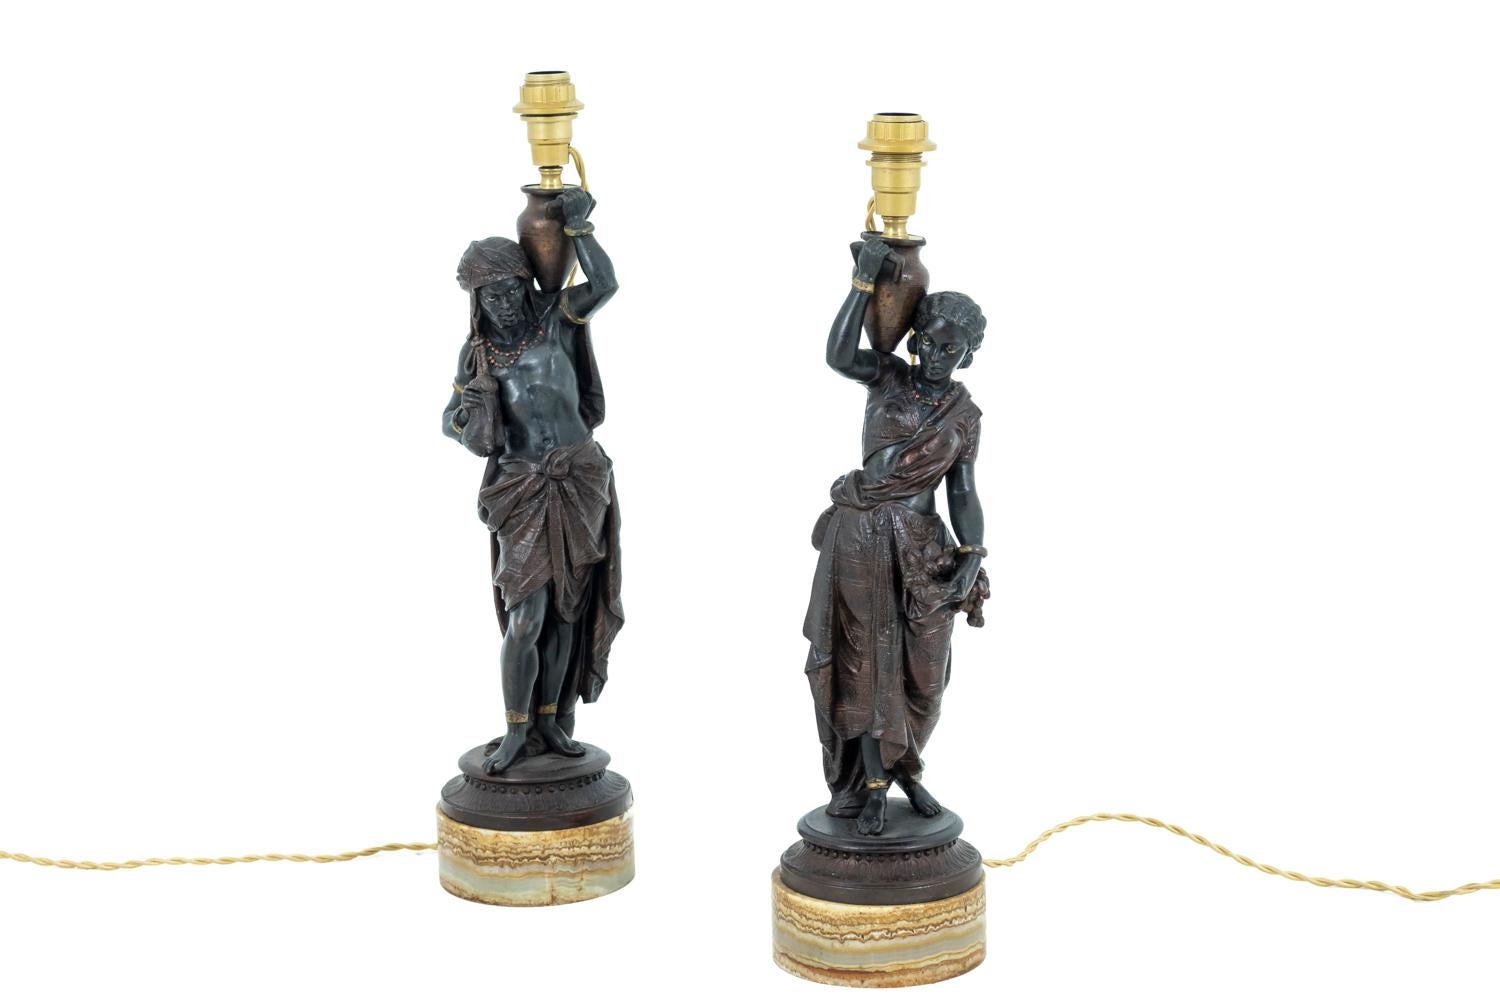 Pair of Oriental style lamps in spelter figuring: for one, an African man wearing a fabric wrapped around his head and falling on his back and a fabric wrapped around his hips. For the other one, an African woman wearing a small top, a sarouel and a